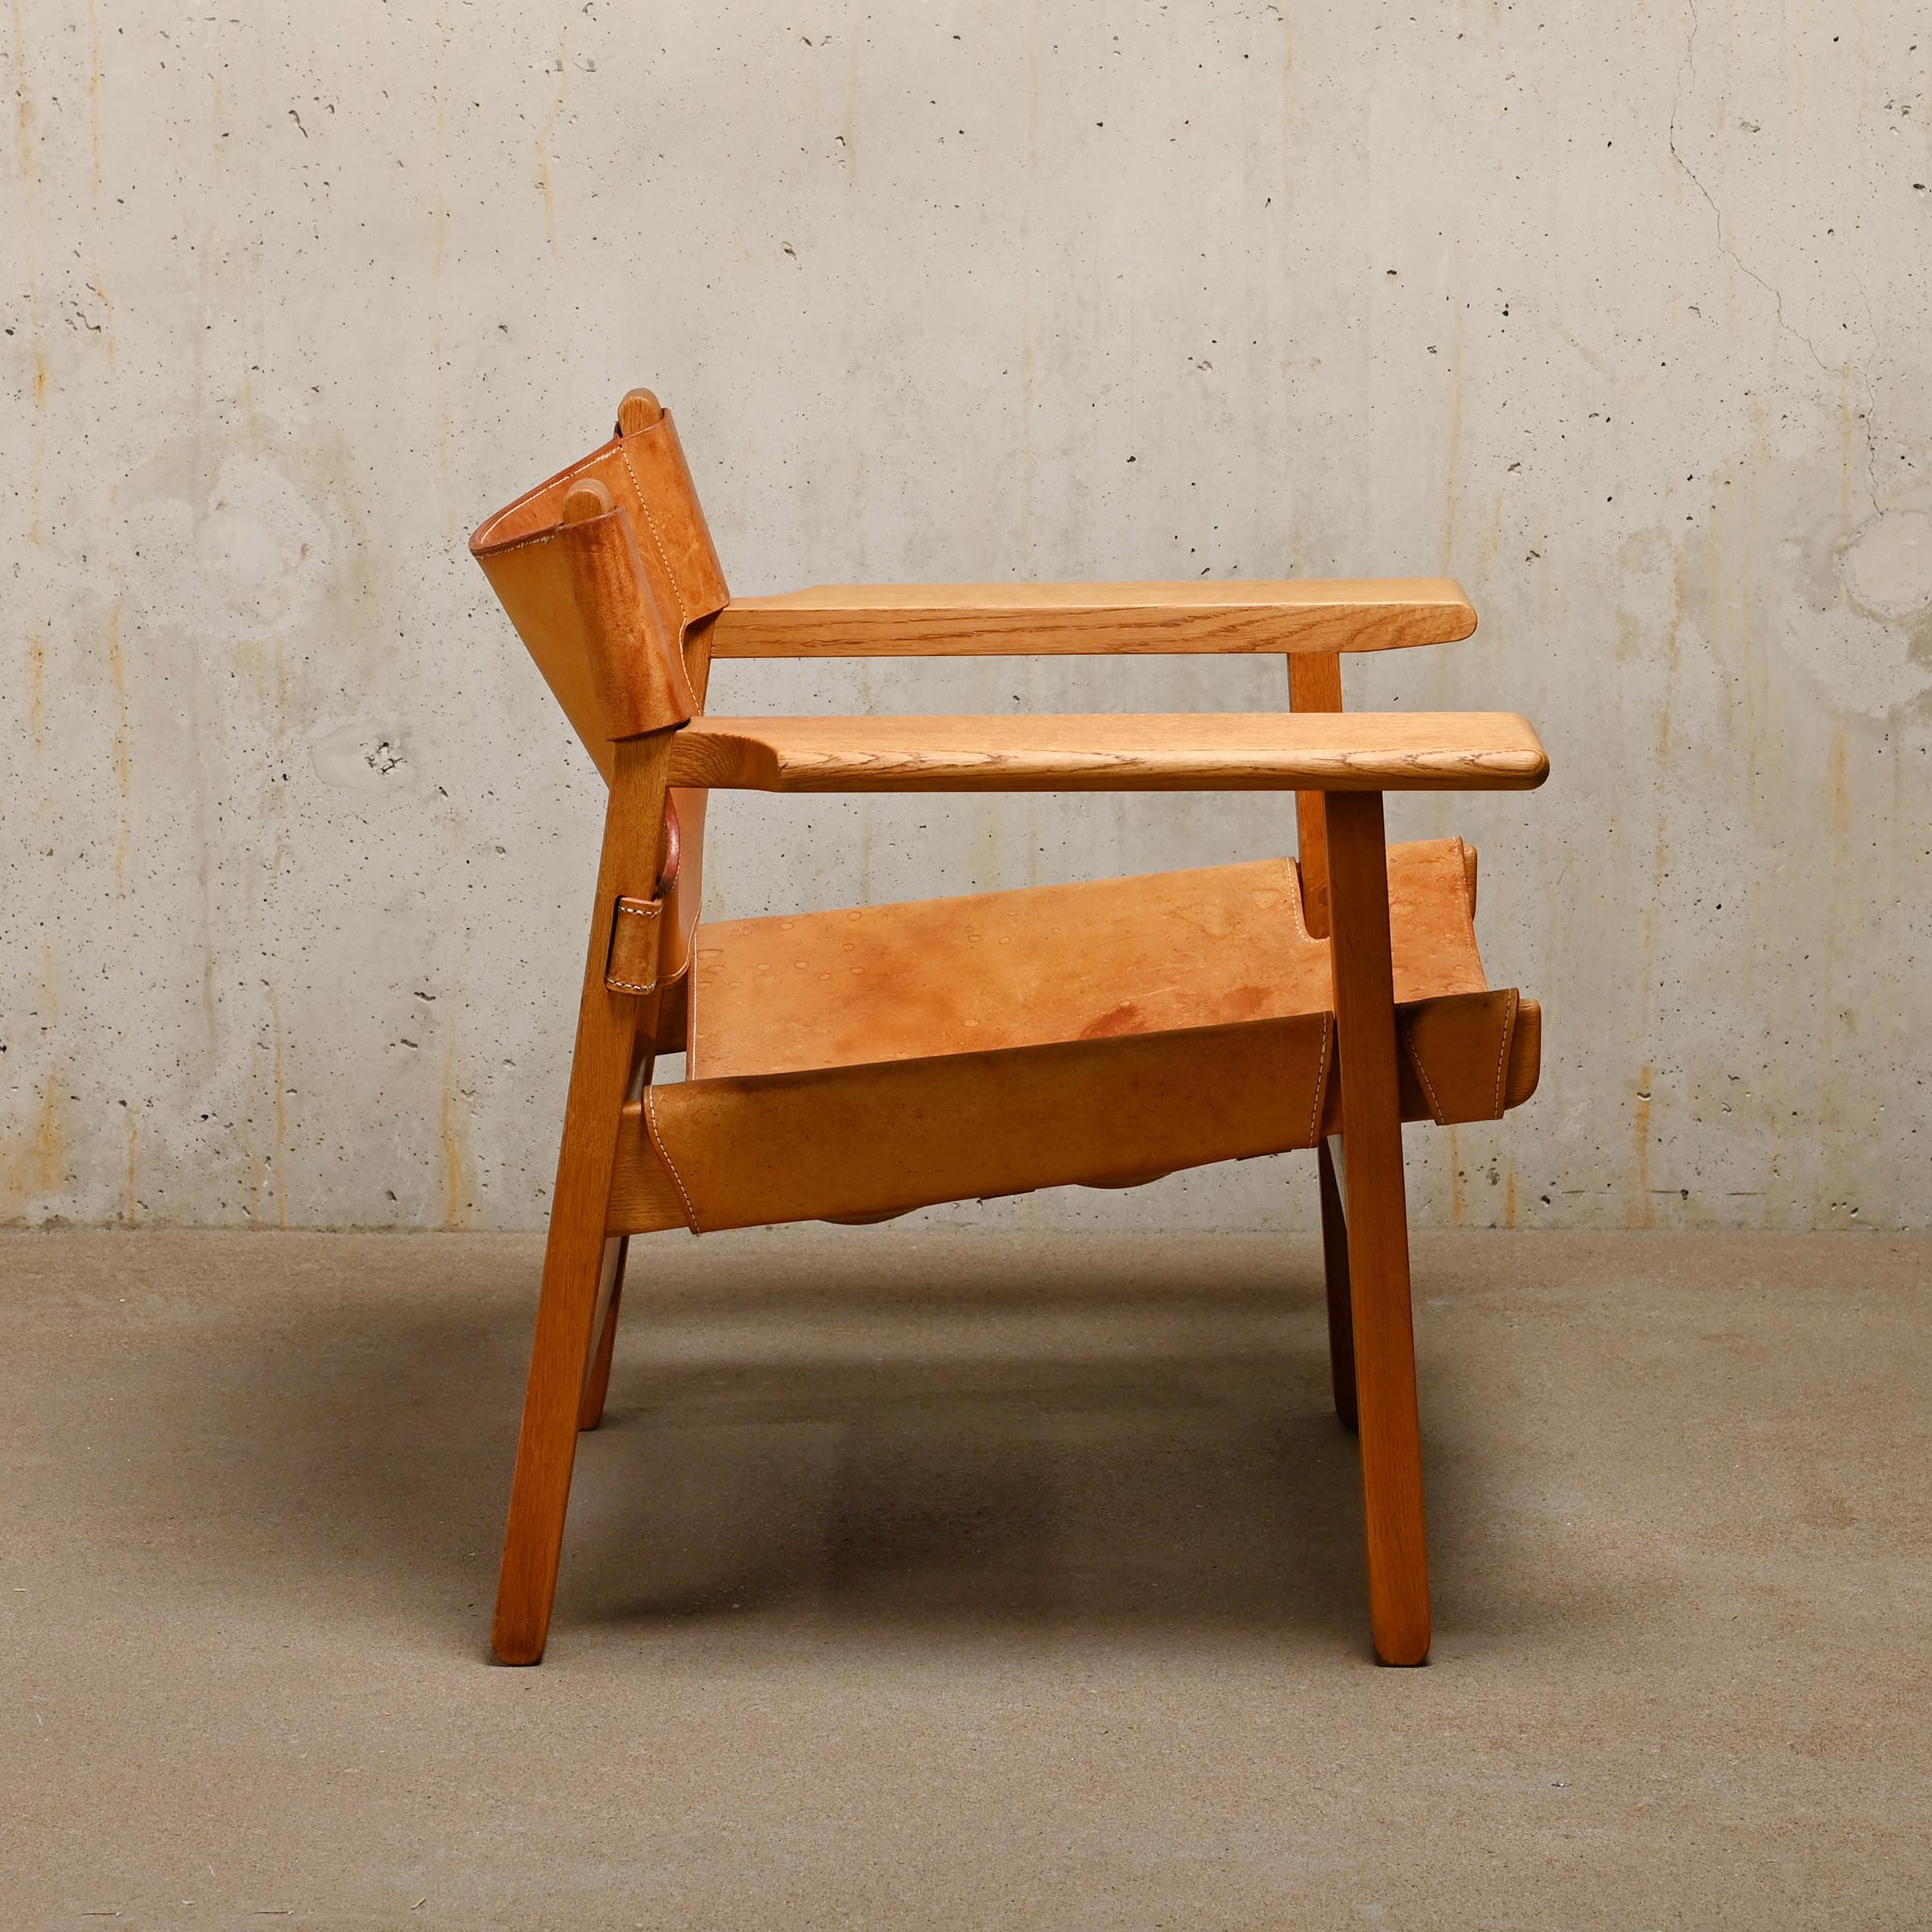 Scandinavian Modern Børge Mogensen Spanish Chair in Cognac Leather and Oak for Fredericia